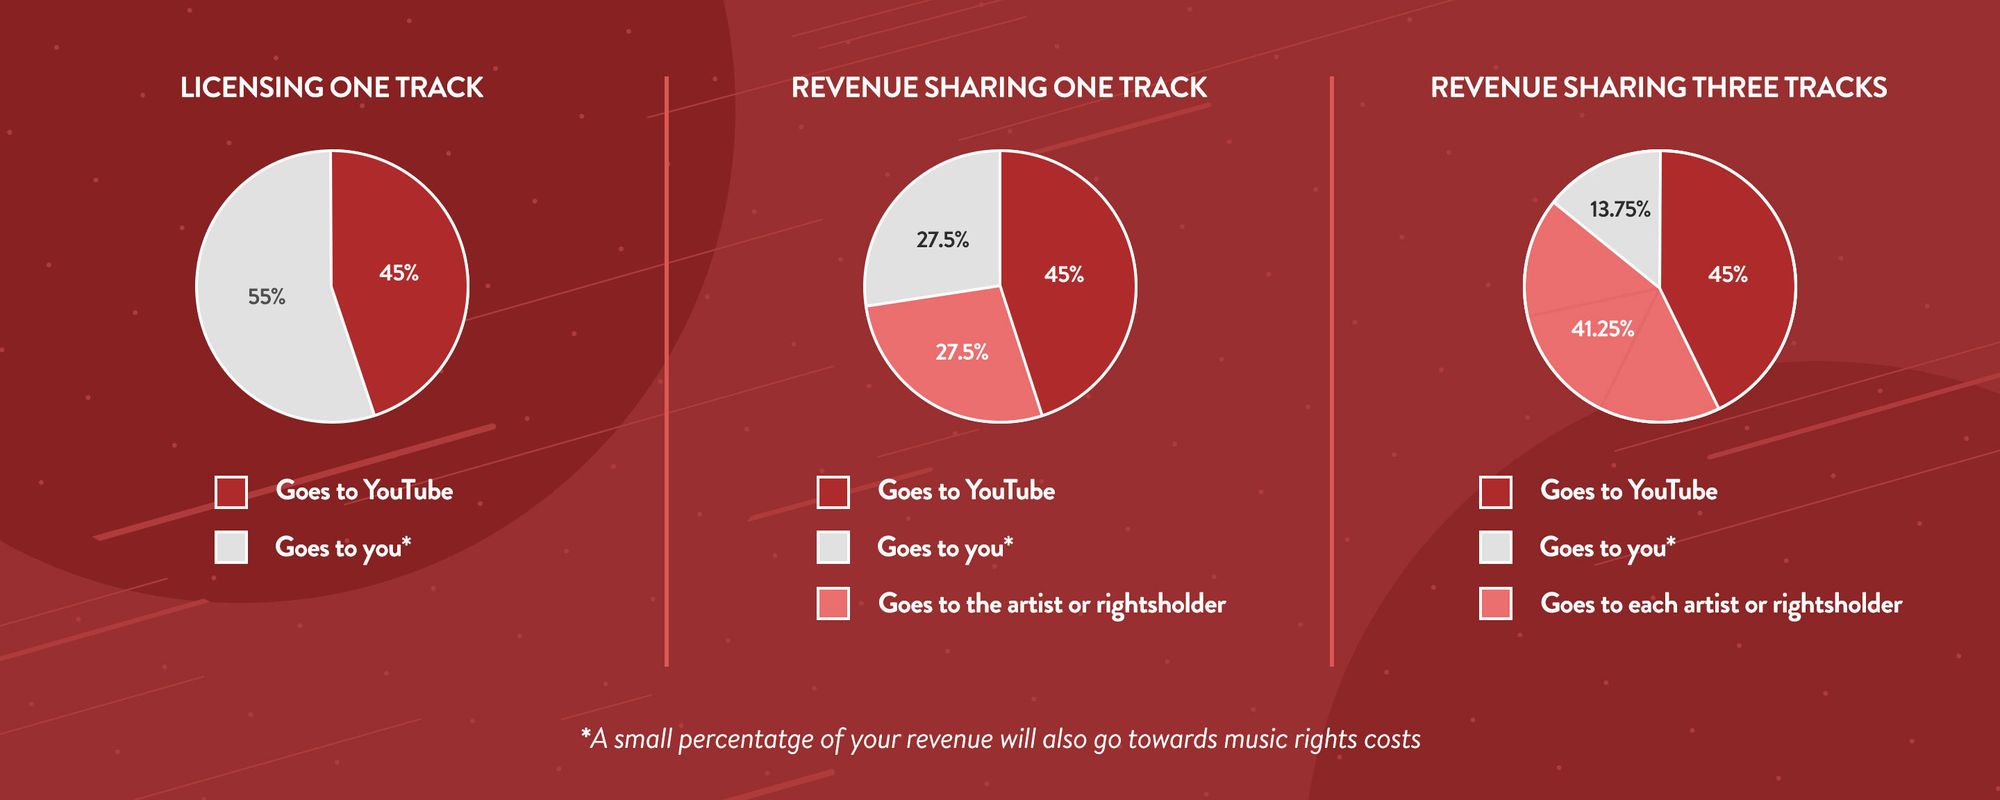 Examples from how much ad revenue you can earn when using YouTube Creator Music tracks.